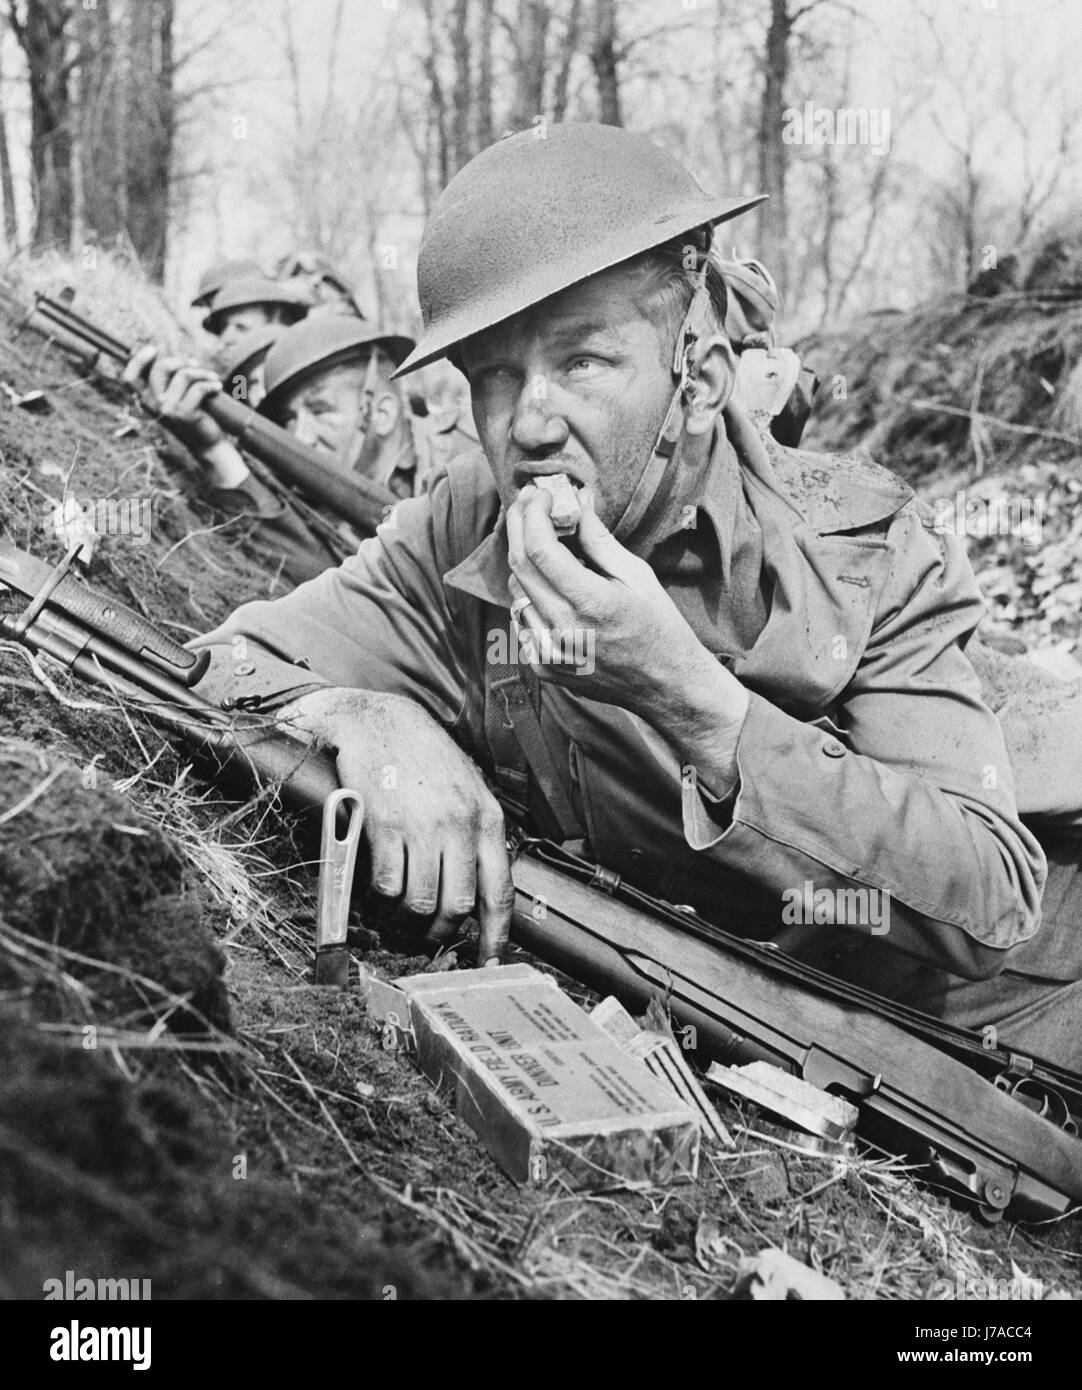 U.S. soldier eating field ration, circa 1942. Stock Photo